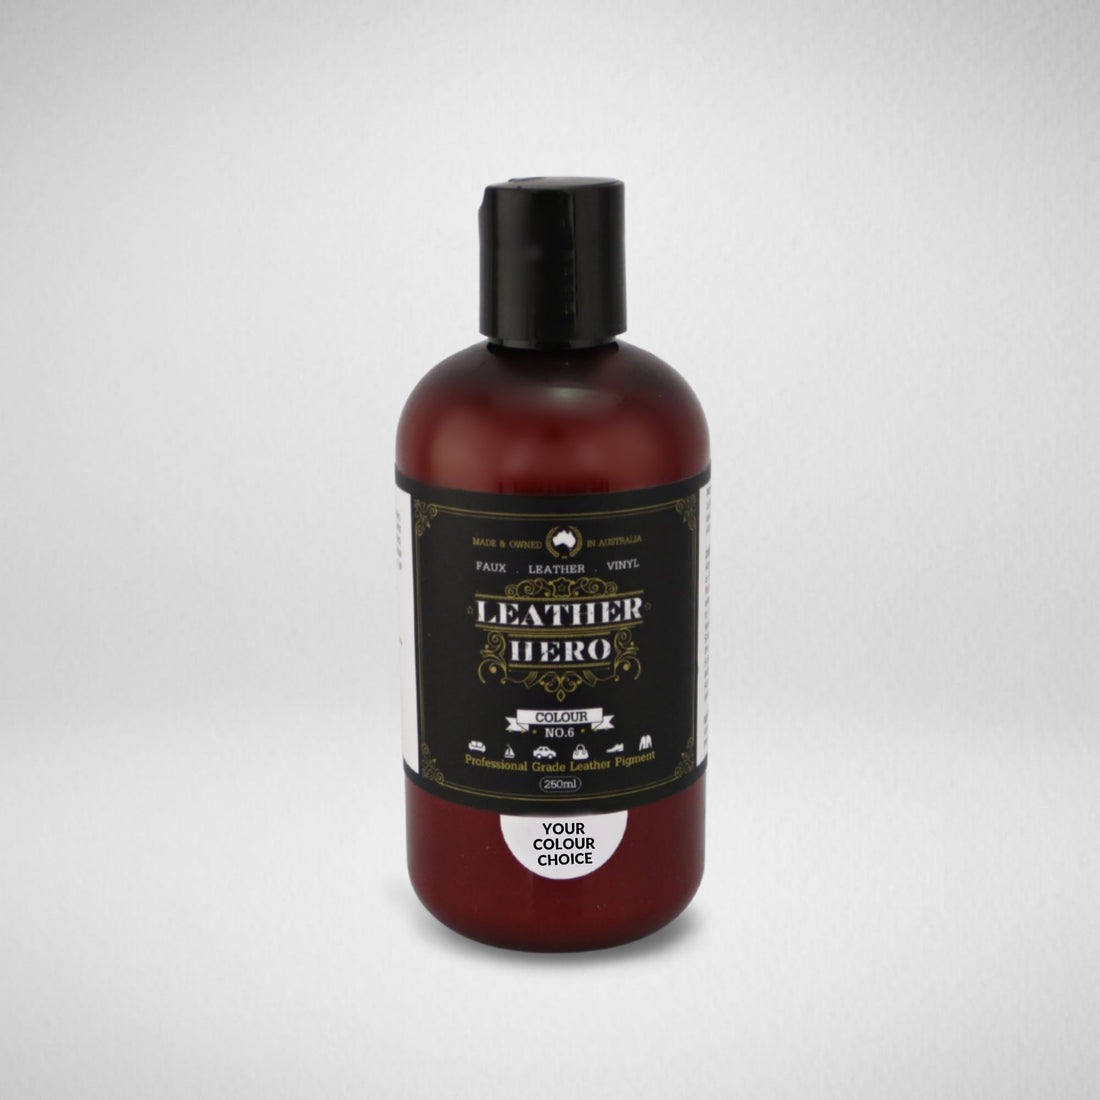 Leather Paint - Paperbark Leather Repair & Recolouring Leather Hero Australia